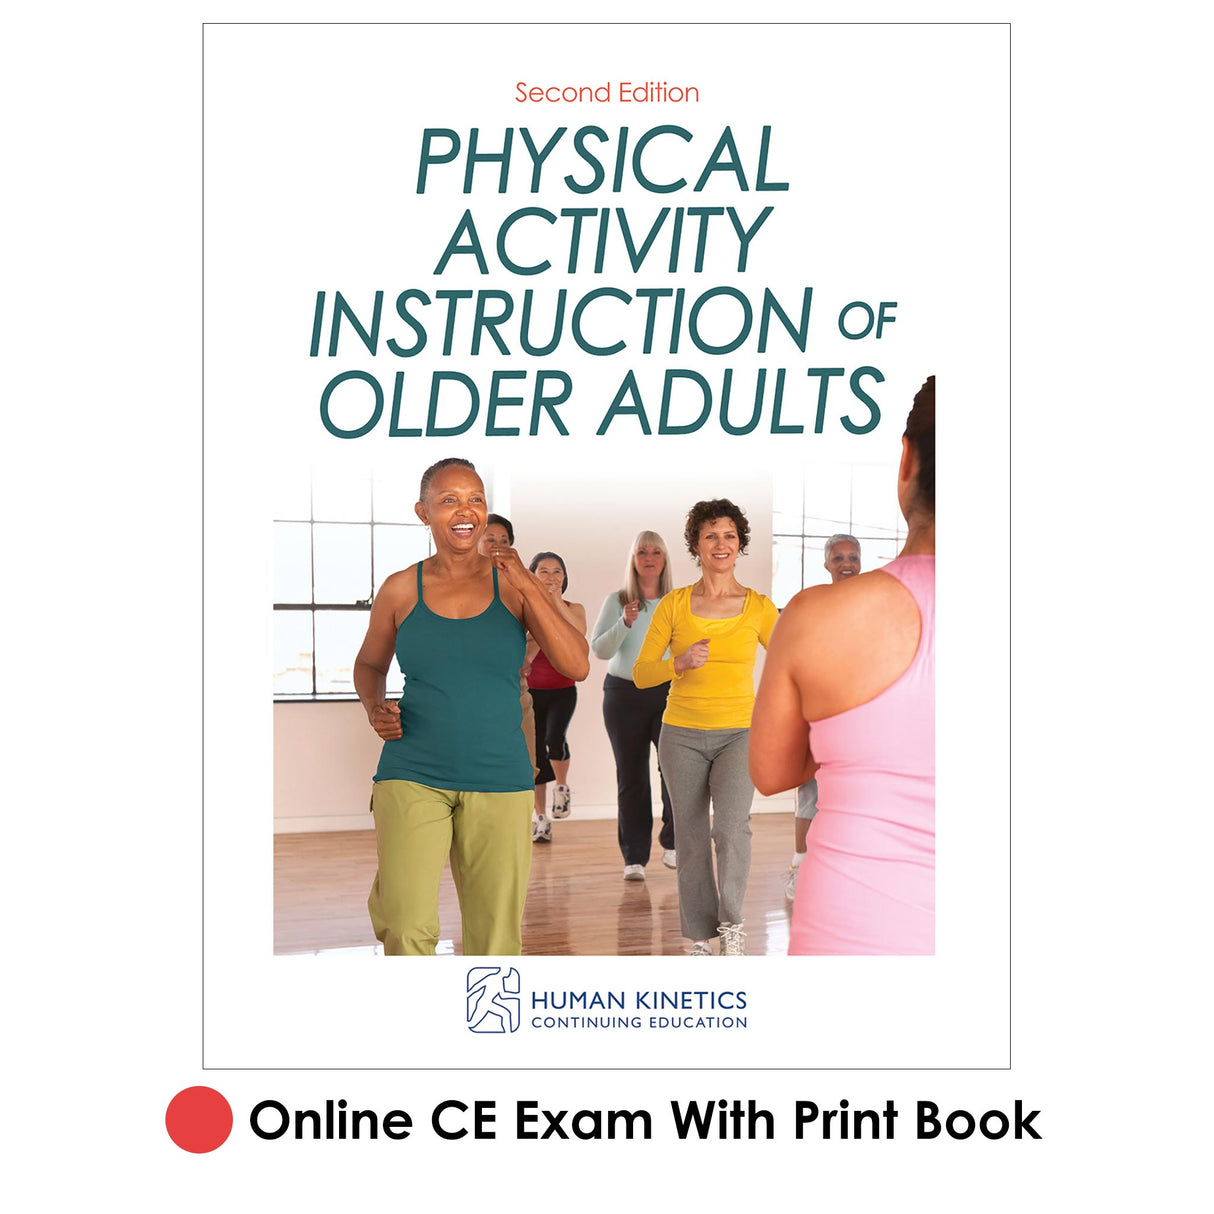 Physical Activity Instruction of Older Adults 2nd Edition Online CE Exam With Print Book